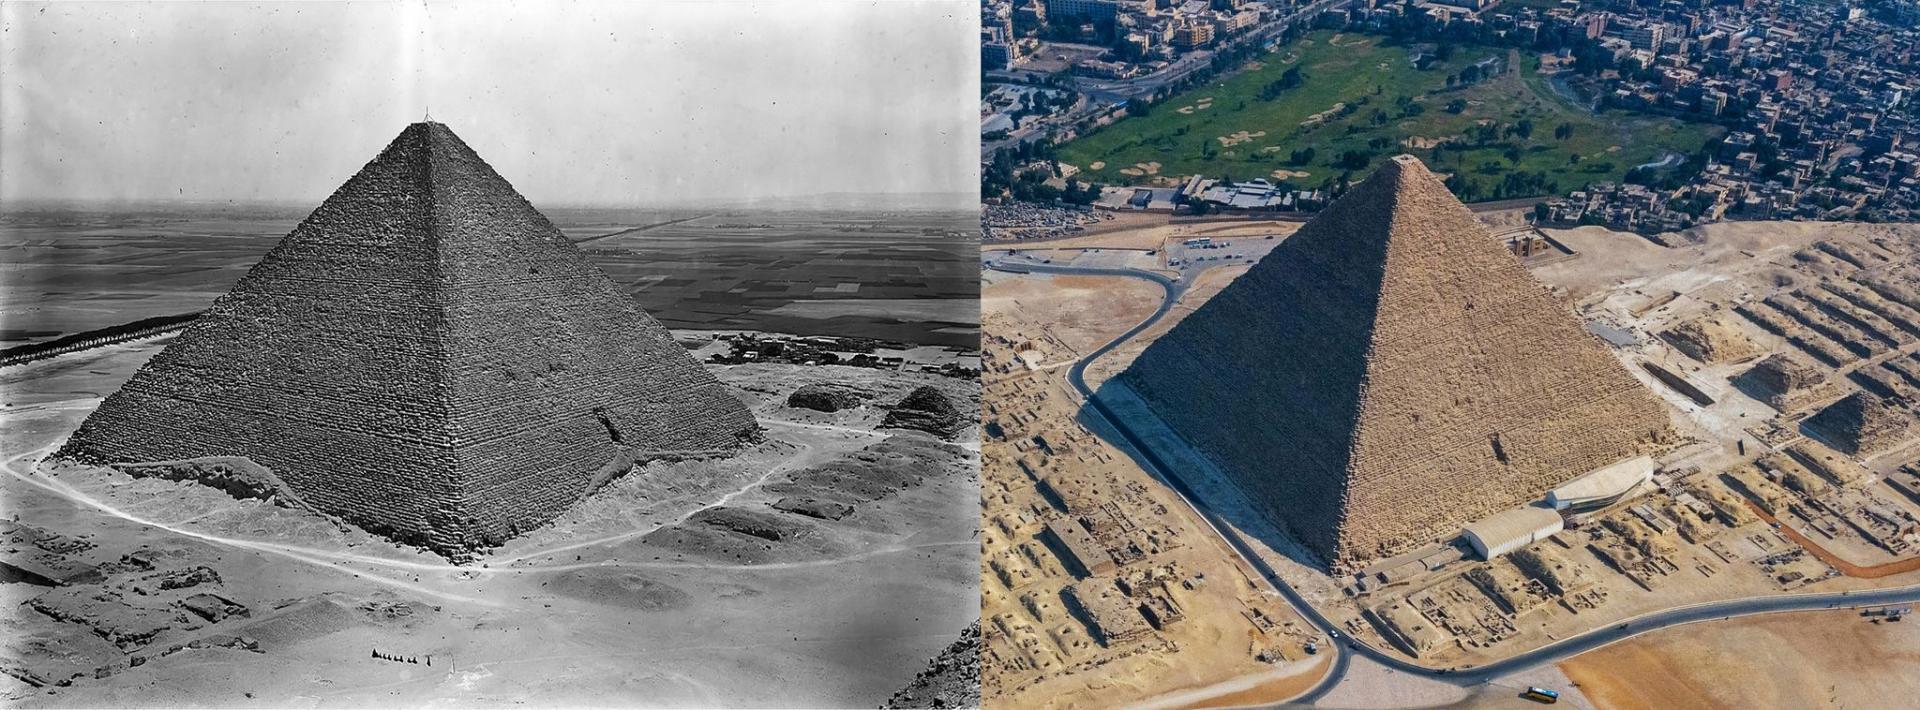 Khufu pyramid then and now